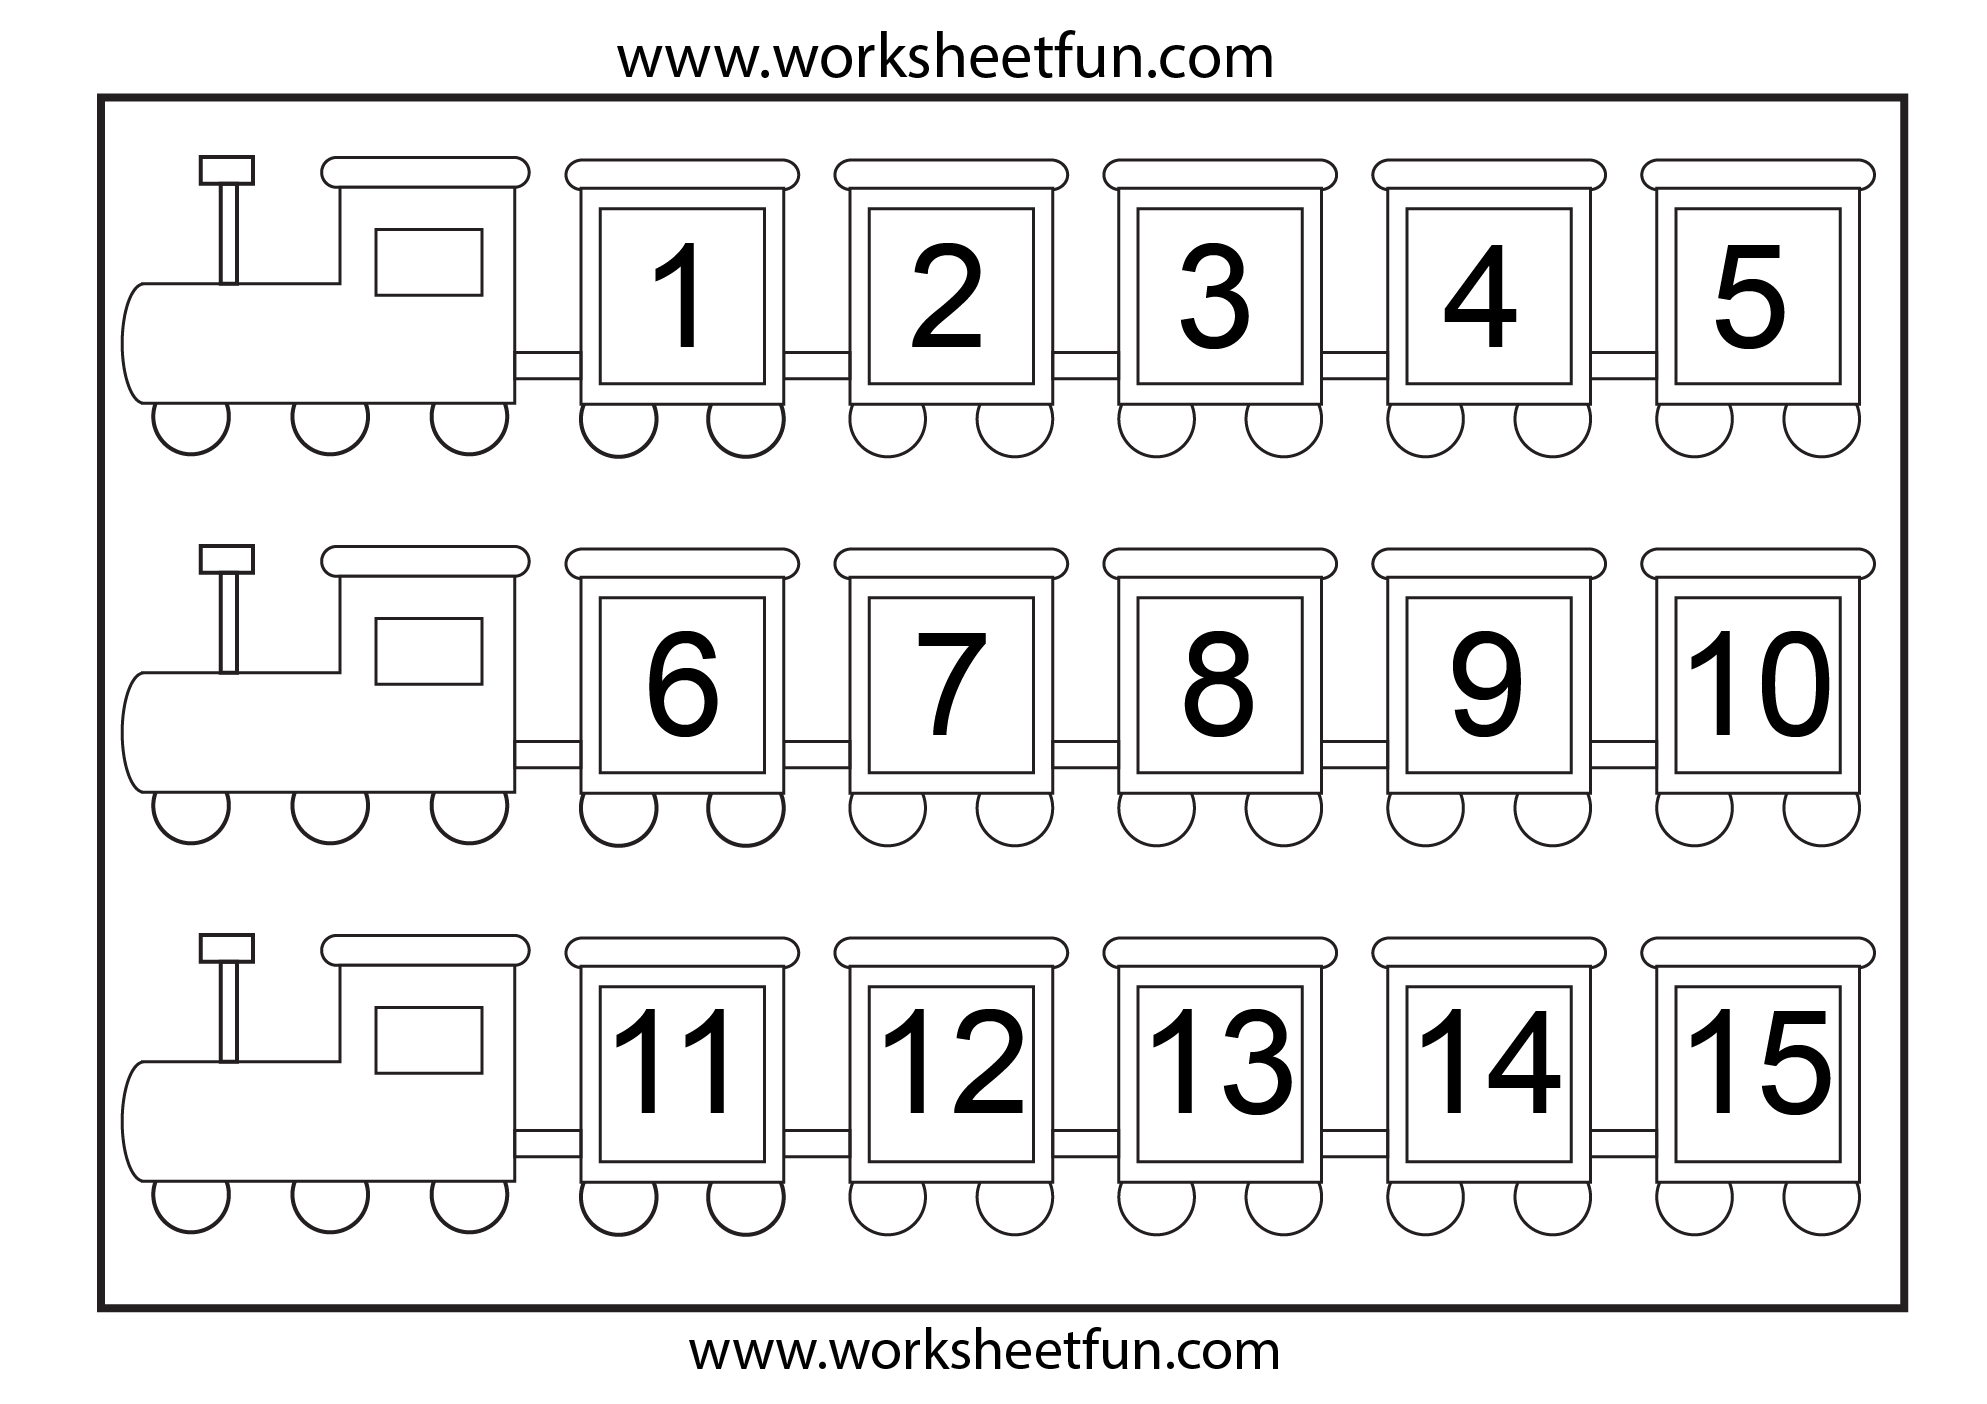 missing number â€“ from  15) numbers (1 Worksheets (1 to Missing Number worksheets 20 1 Chart 6 â€“ â€“ 1 100)